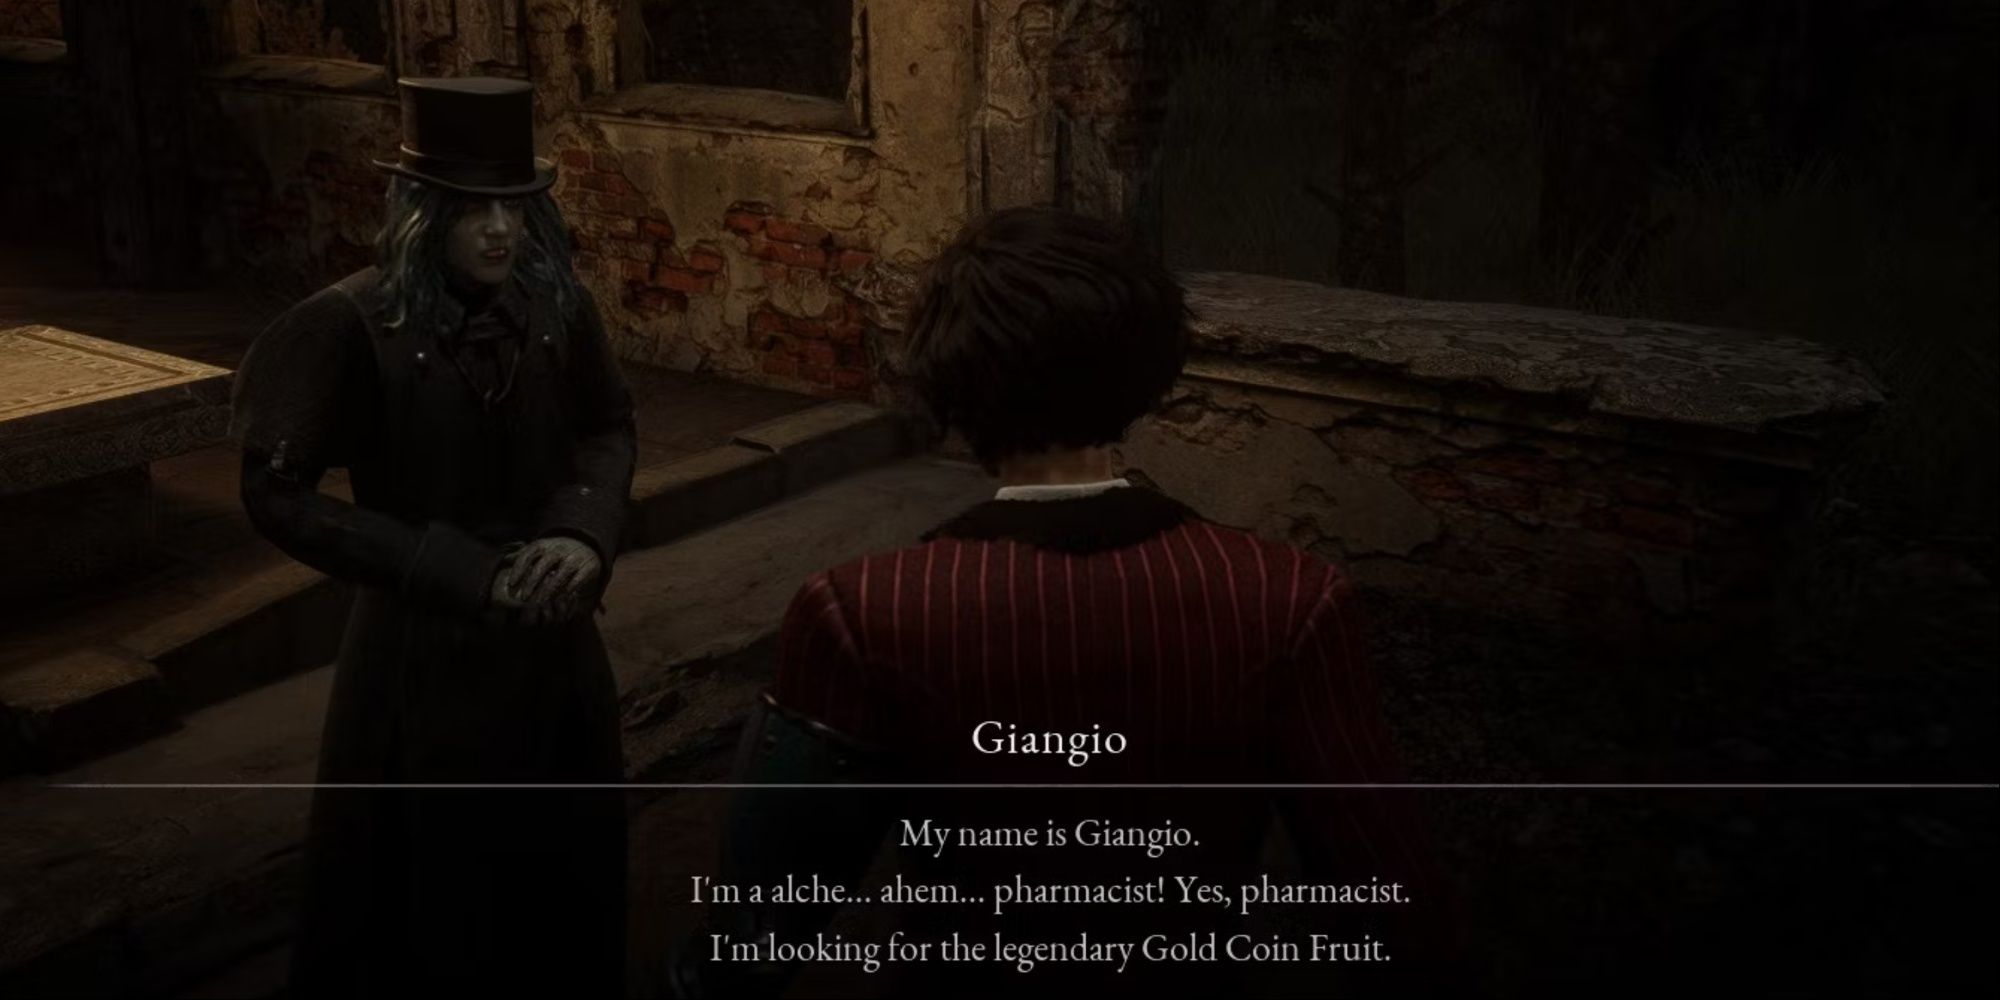 Pinocchio first meeting Giangio in Lies of P.